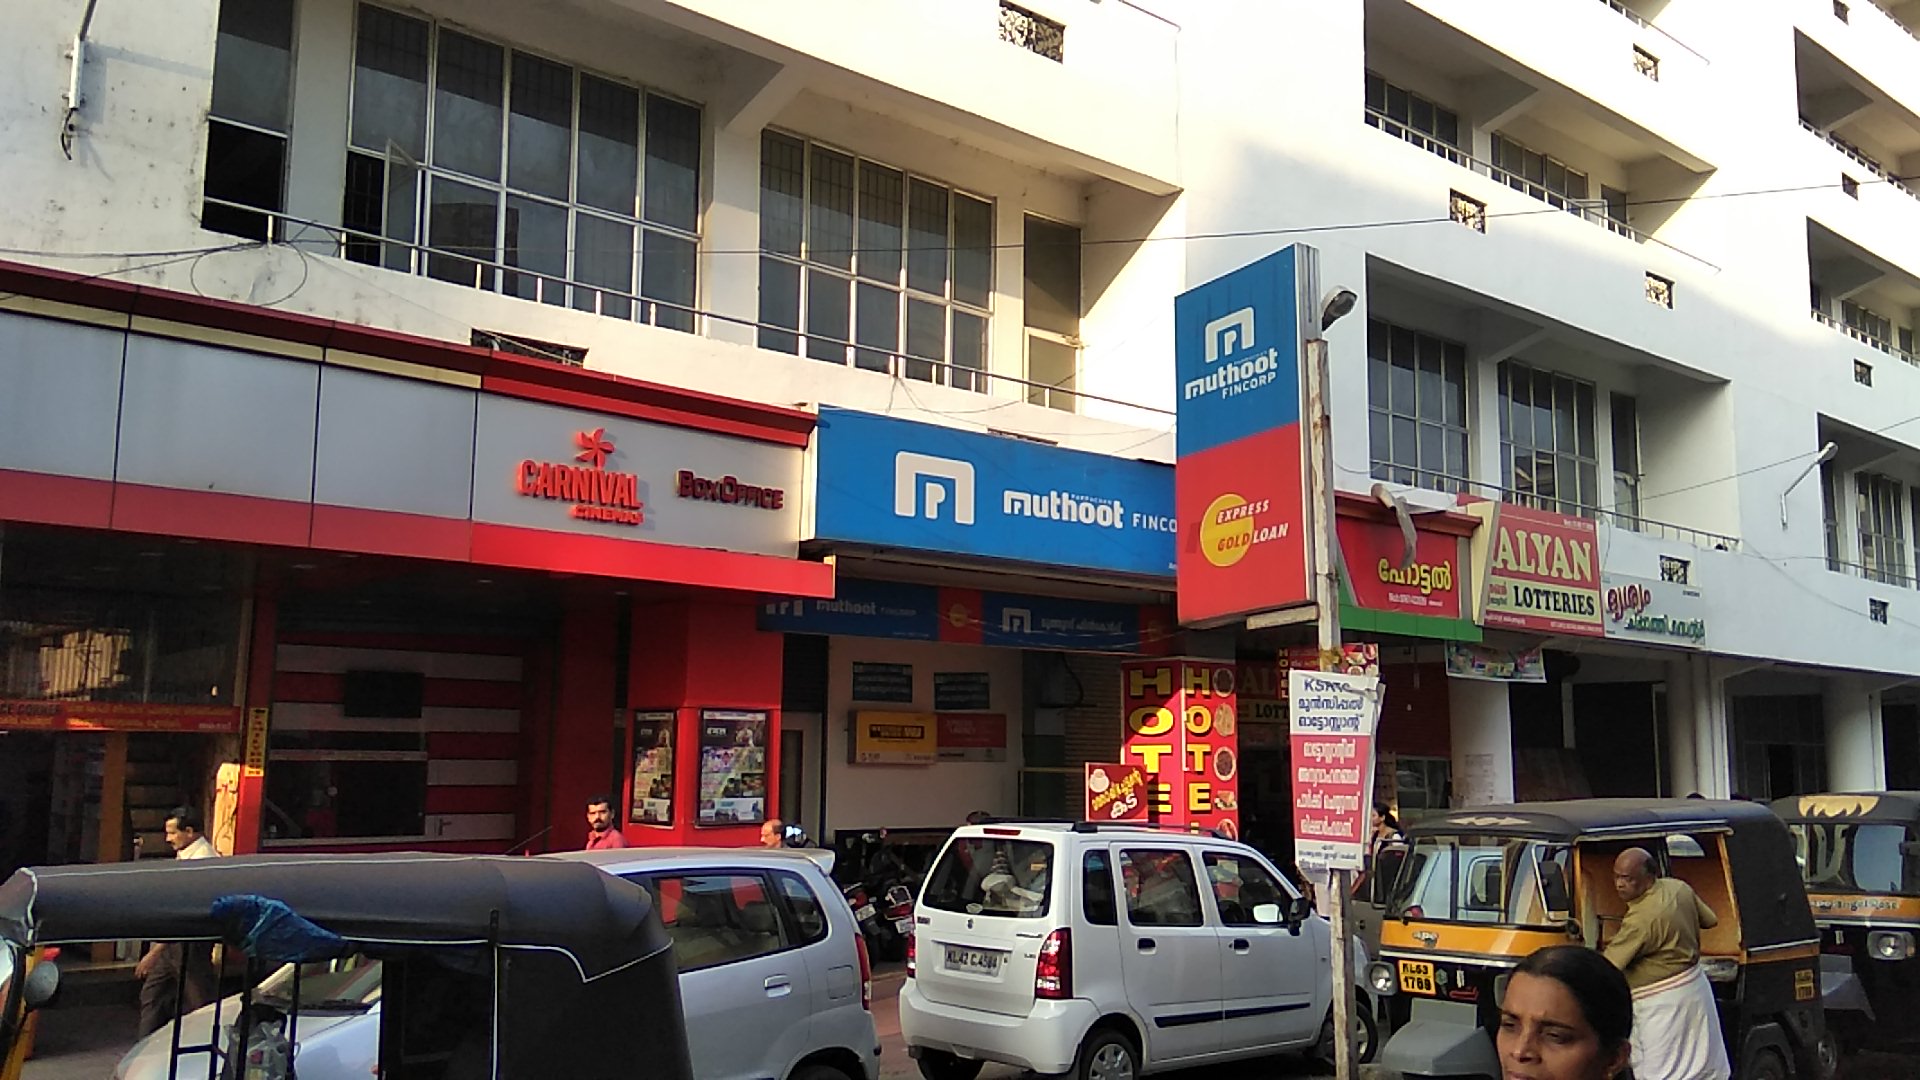 Muthoot Fincorp Gold Loan Services in Angamaly, Angamaly, Kerala